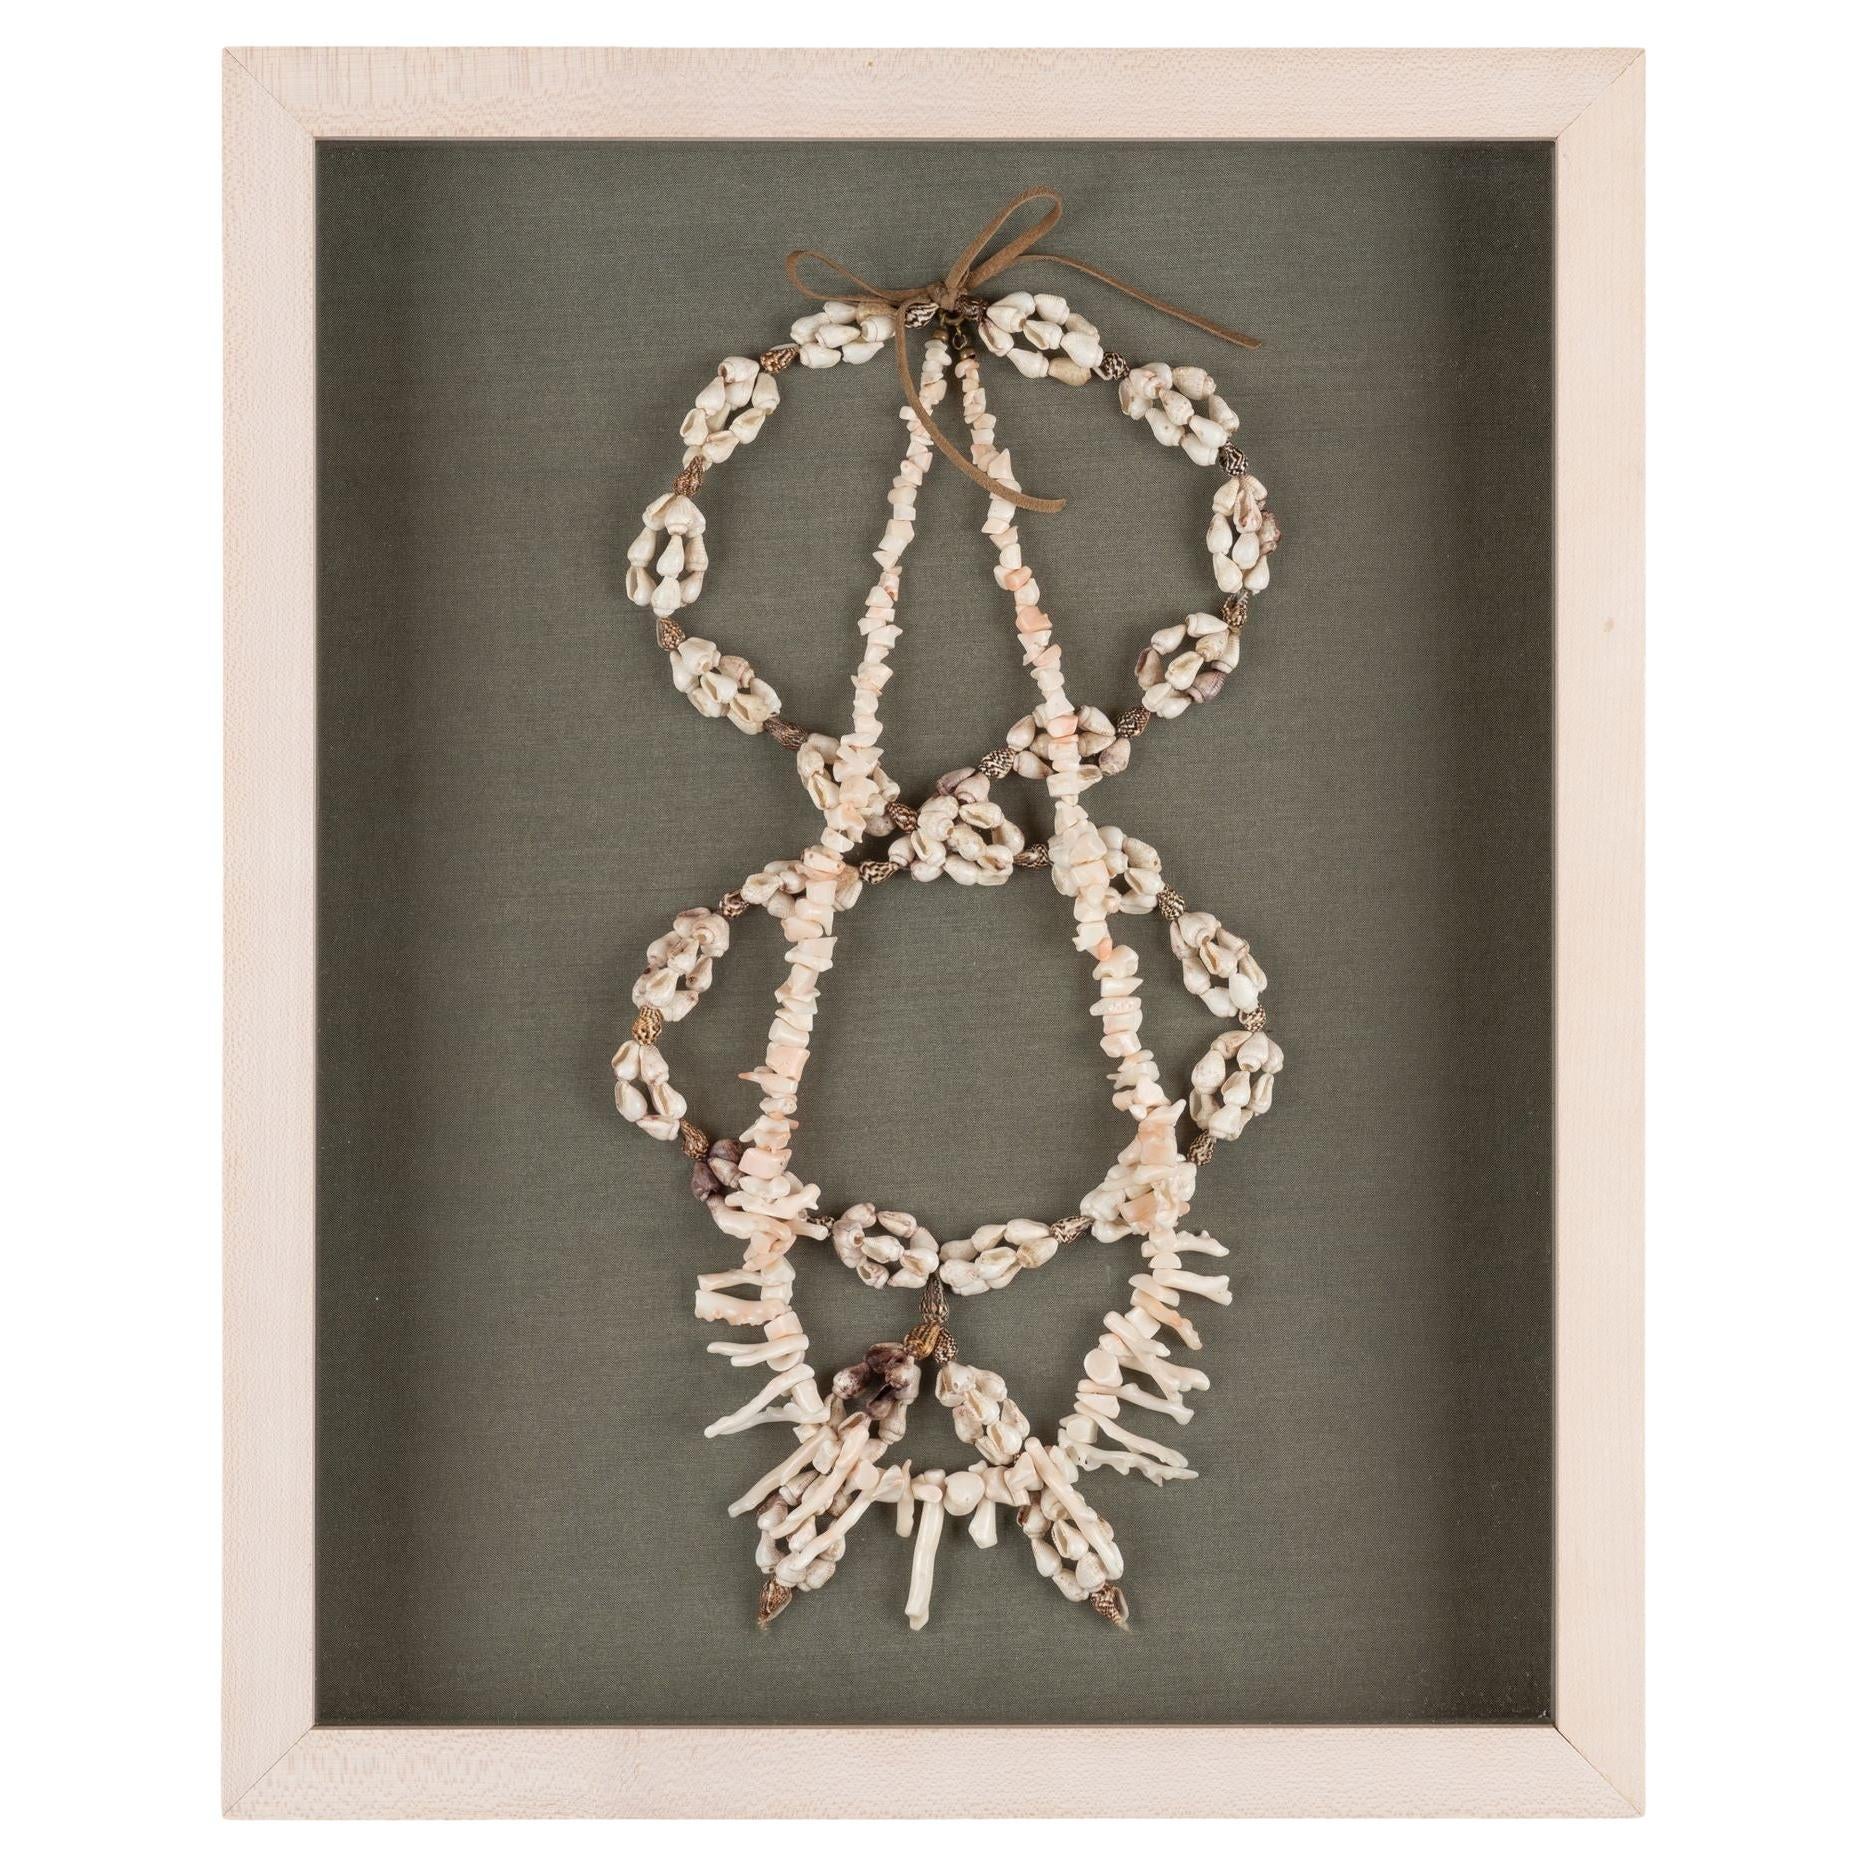 Shell and white branch coral necklaces mounted in a custom shadowbox For Sale